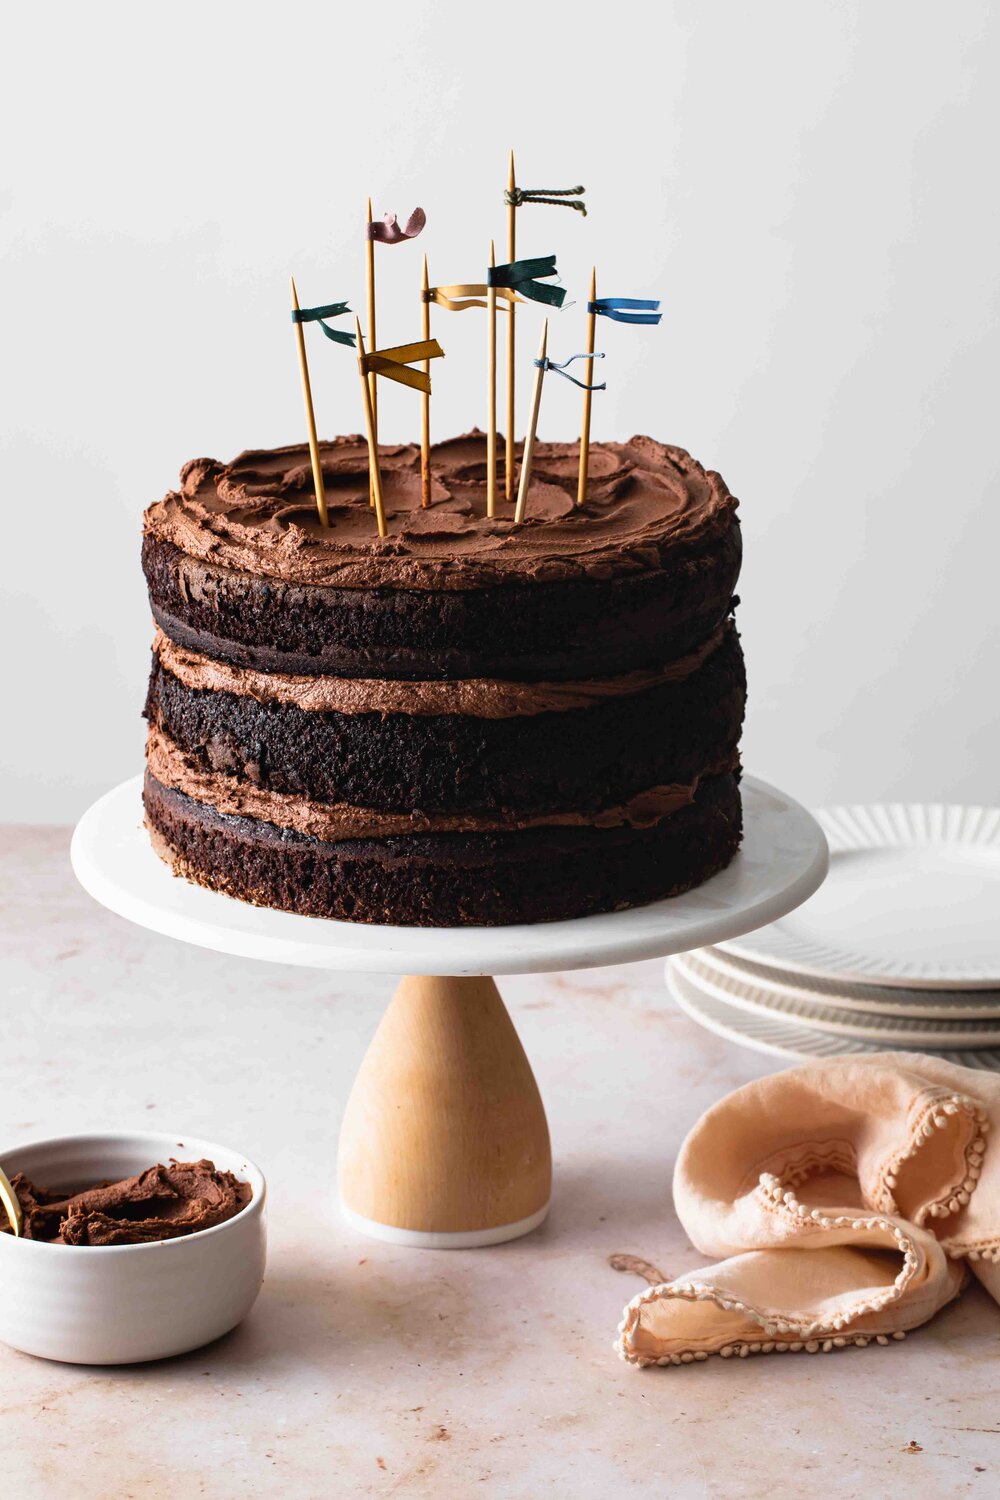 A 3-layer chocolate cake with fluffy fudge frosting swirled on top.